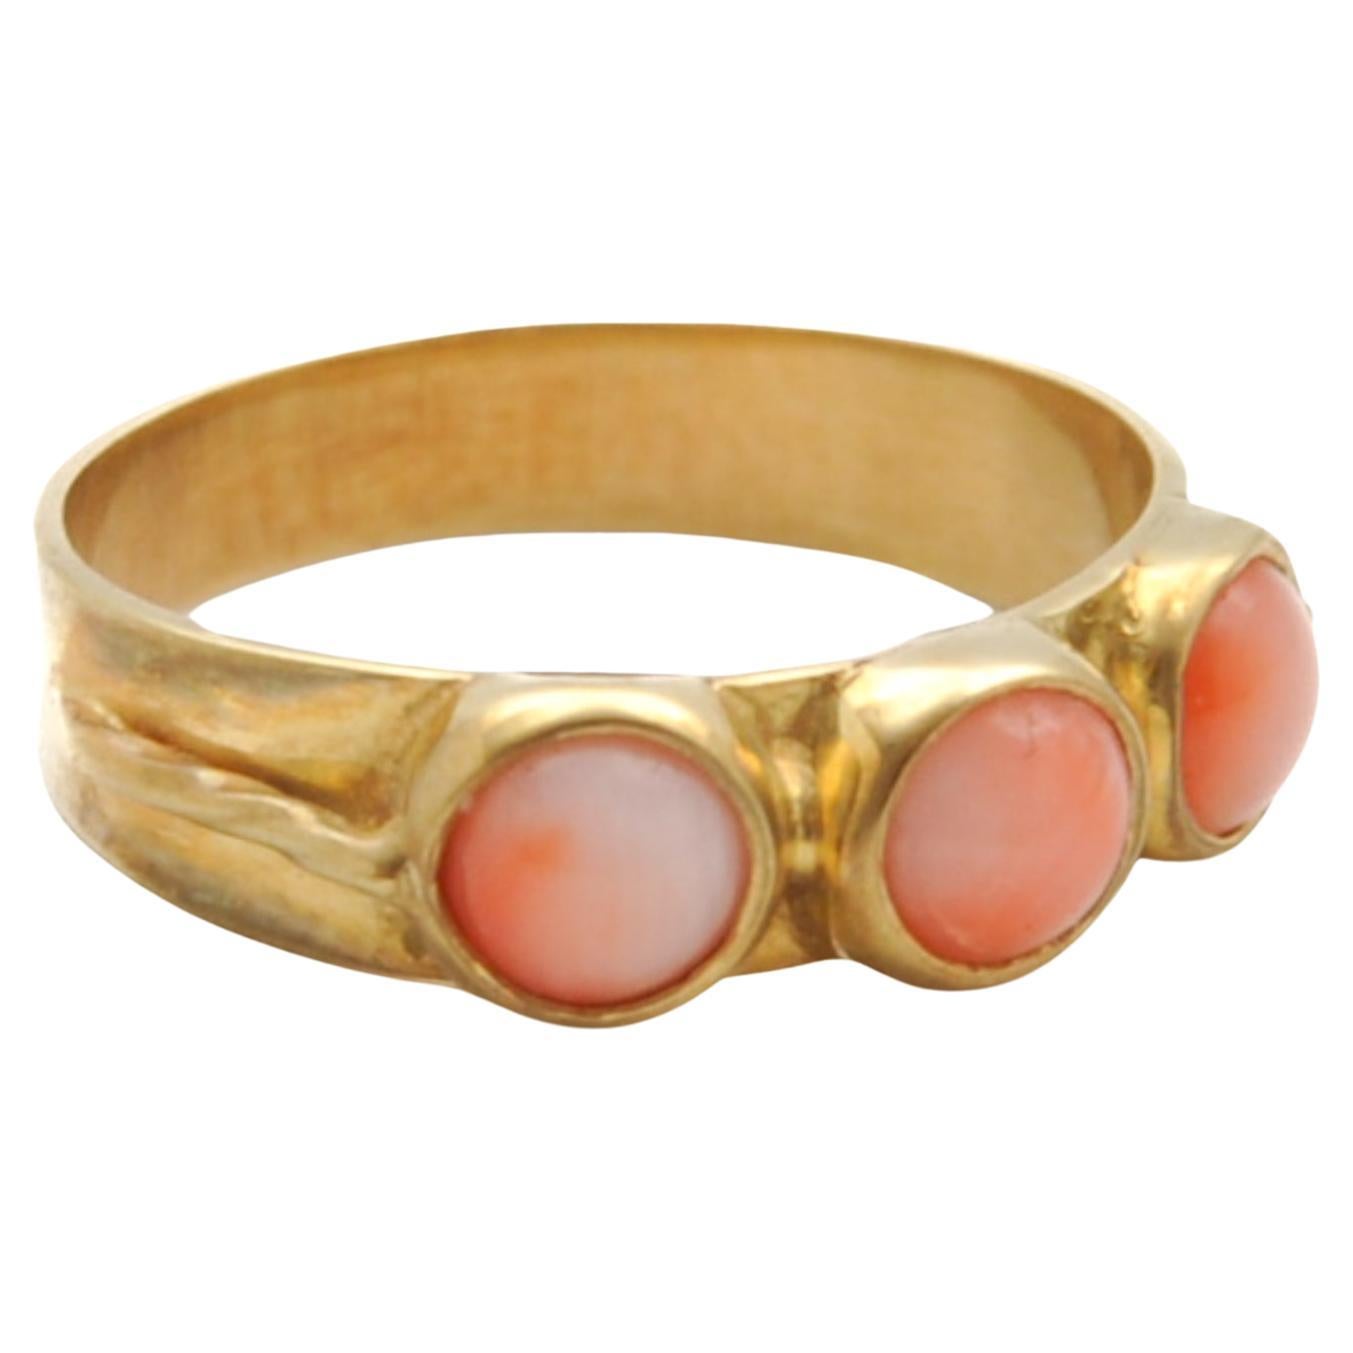 A vintage triple pink coral stone set in a gold band ring. The three stones are round shaped cabochons surrounded by a 14 karat yellow gold frame and bezel set. Coral is considered a symbol of renewal, vitality and beauty. The ring contains the pink